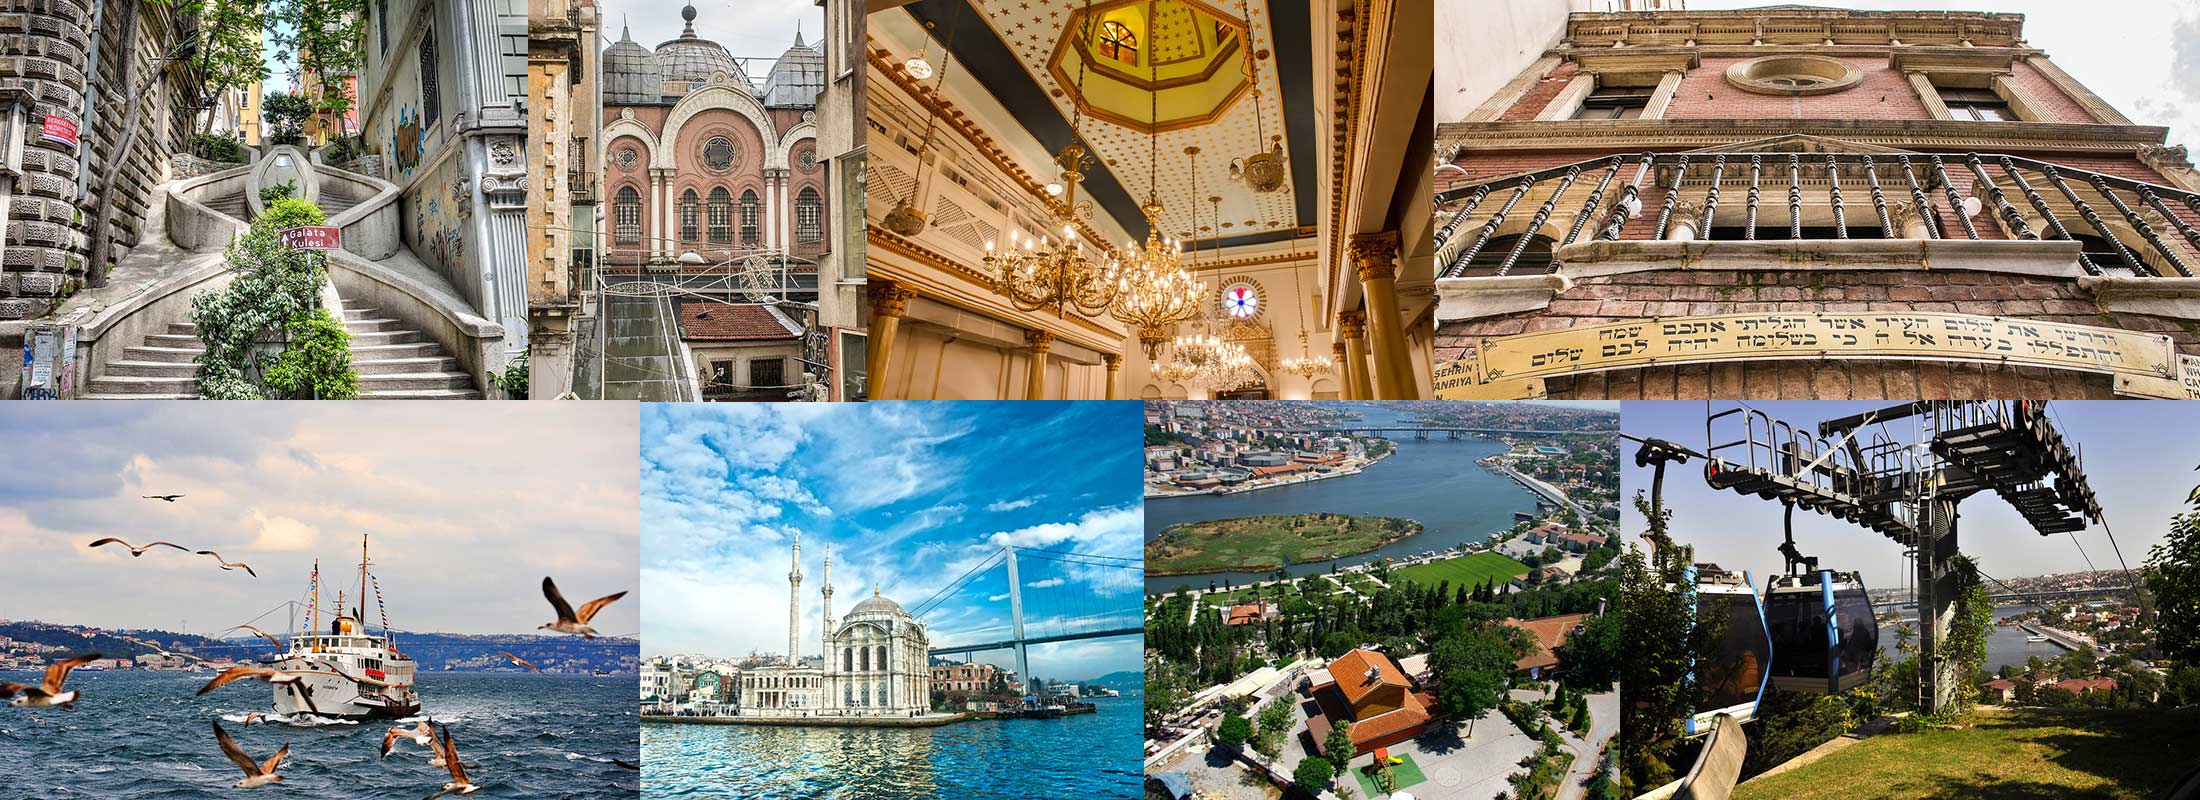 jewish-district-synagogues-golden-horn-pierre-loti-hill-bosphorus-cruise-city-tour